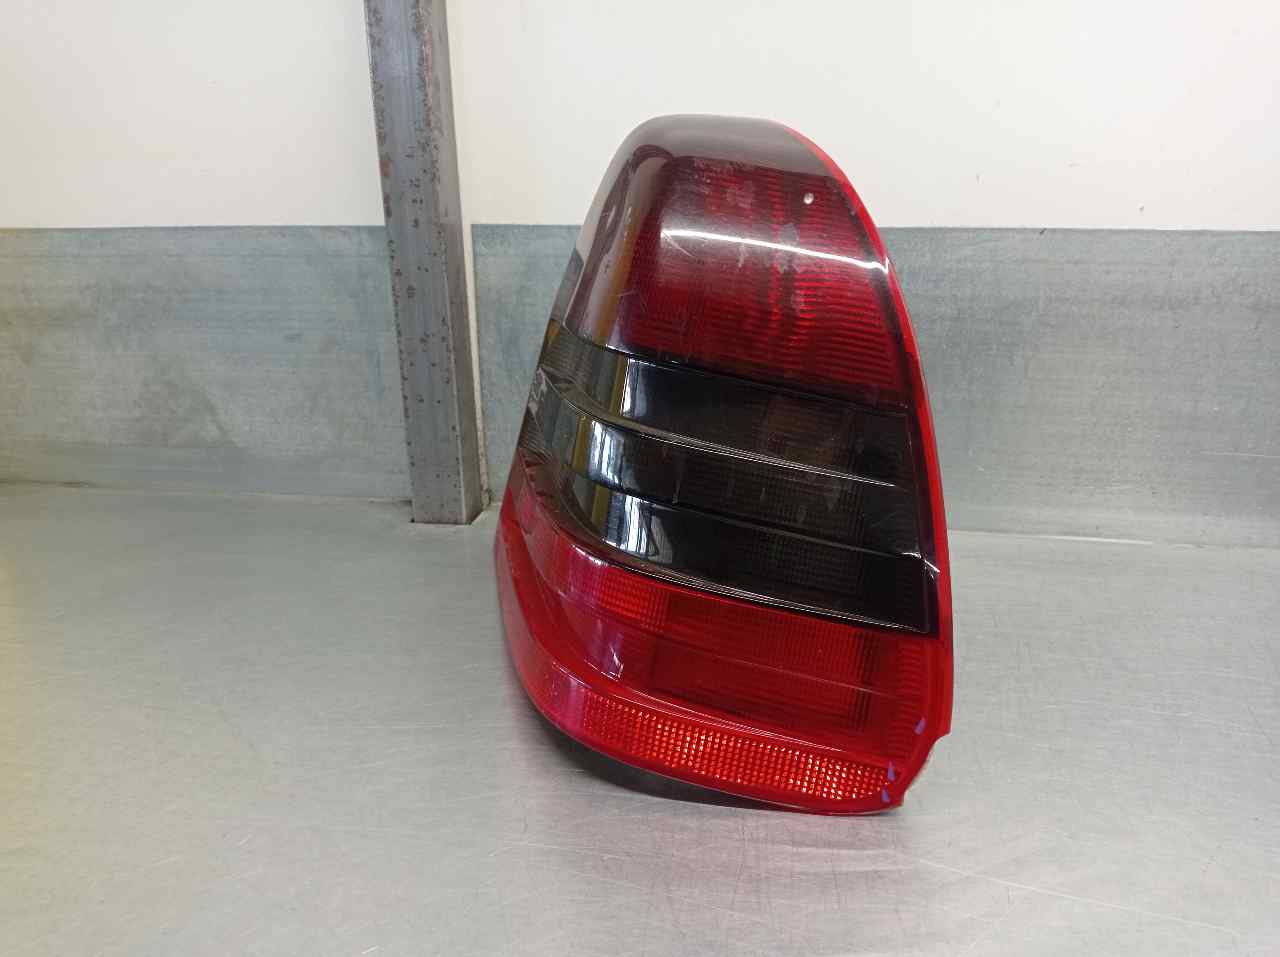 MERCEDES-BENZ C-Class W202/S202 (1993-2001) Rear Right Taillight Lamp 2028203664, 4PUERTAS 21721553